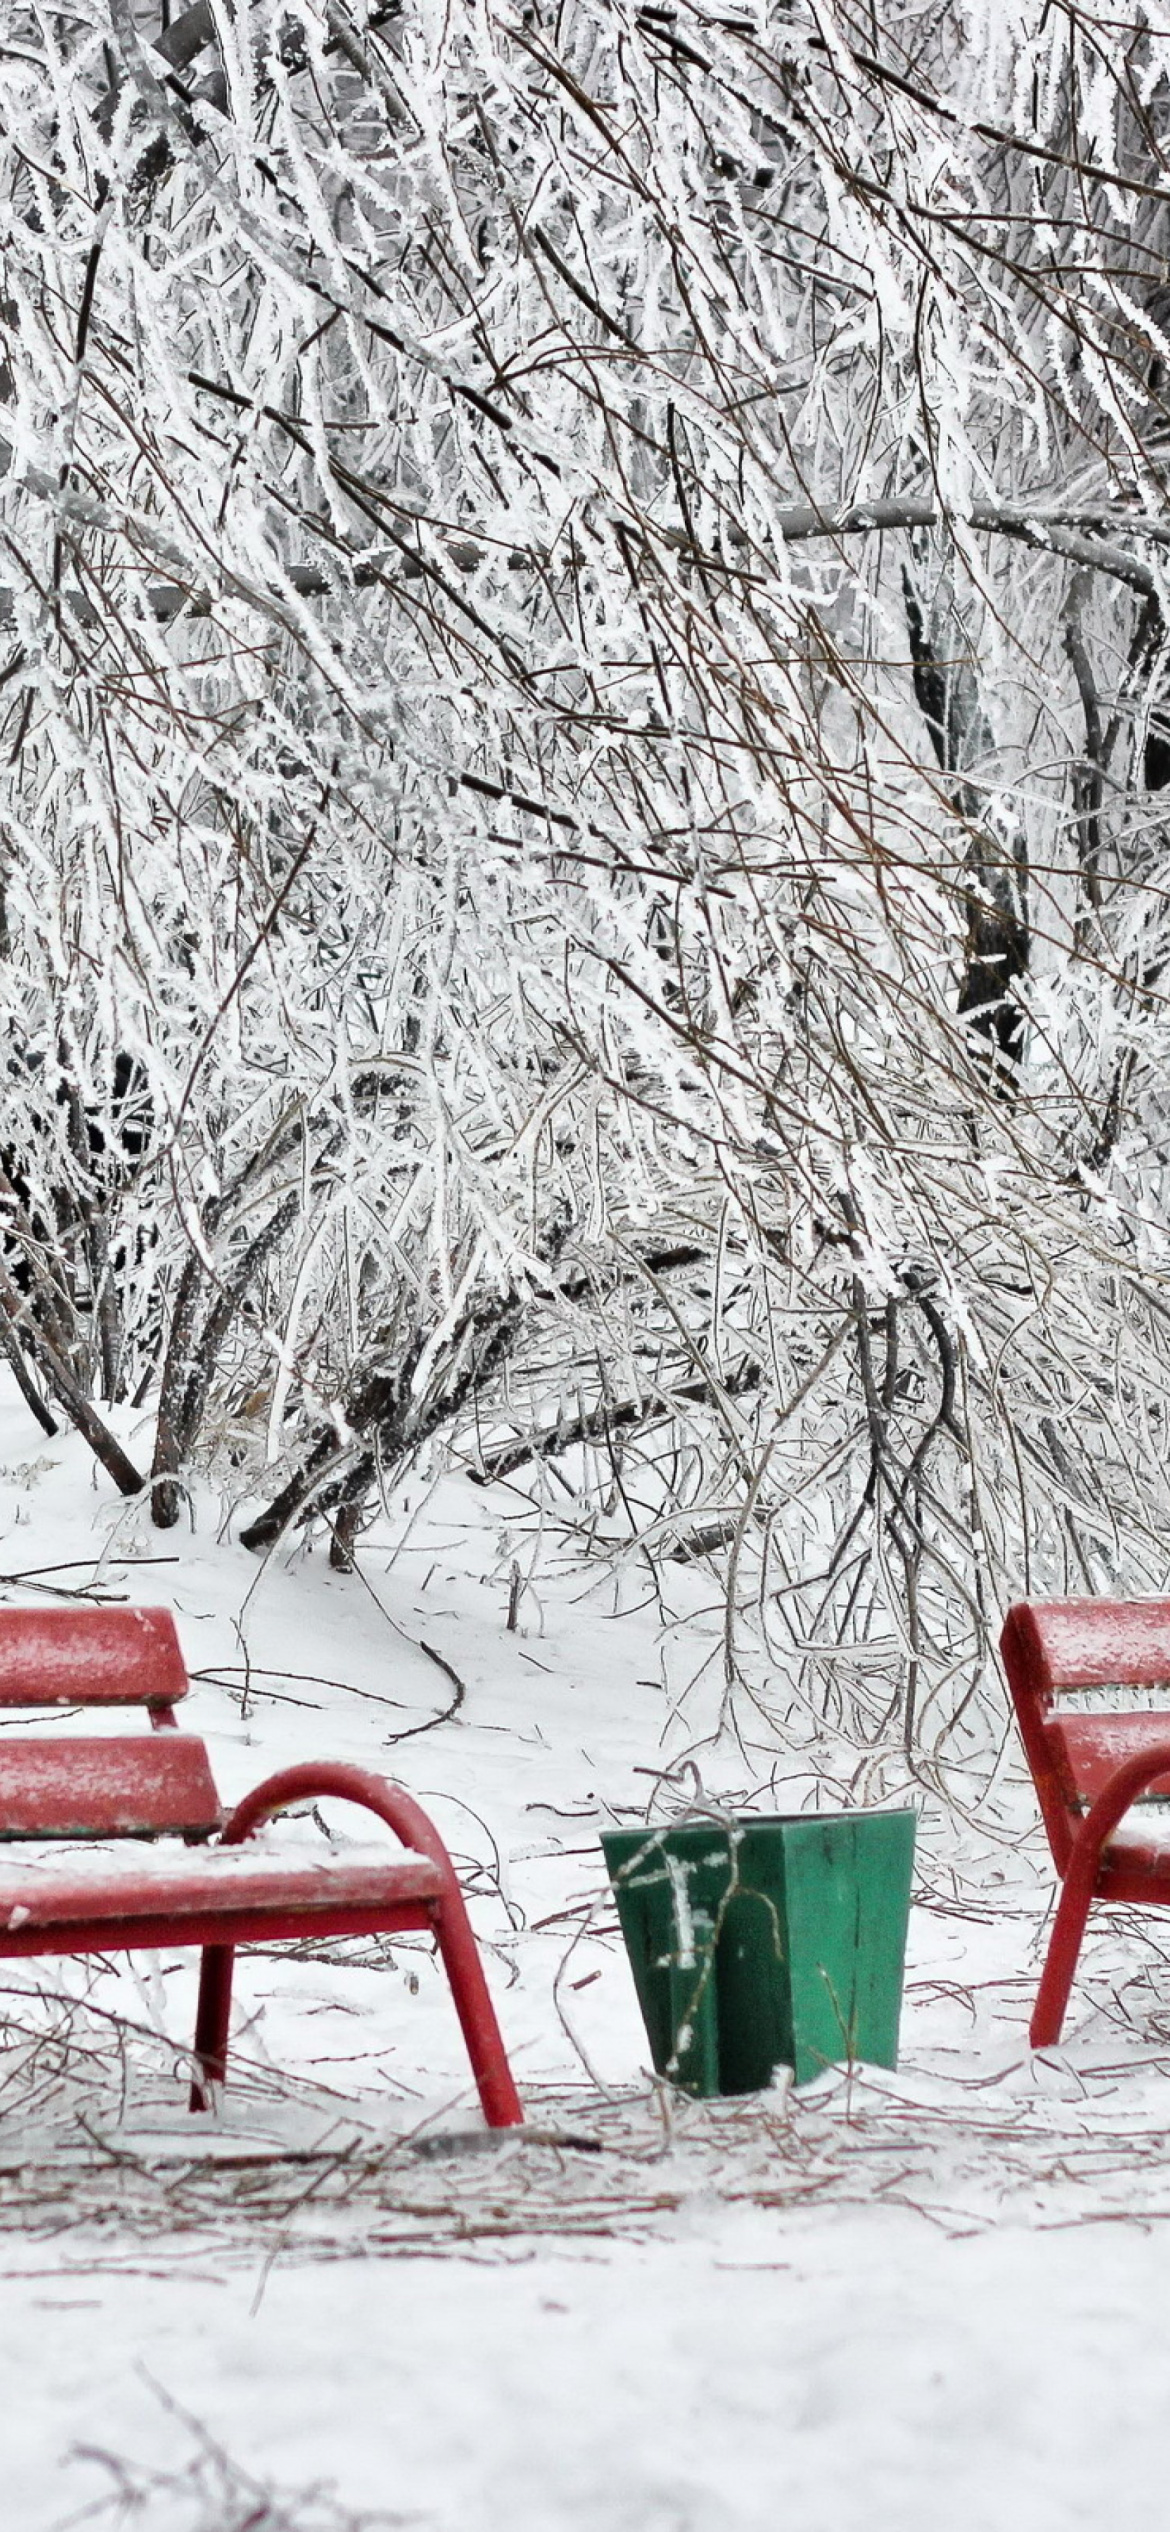 Benches in Snow wallpaper 1170x2532